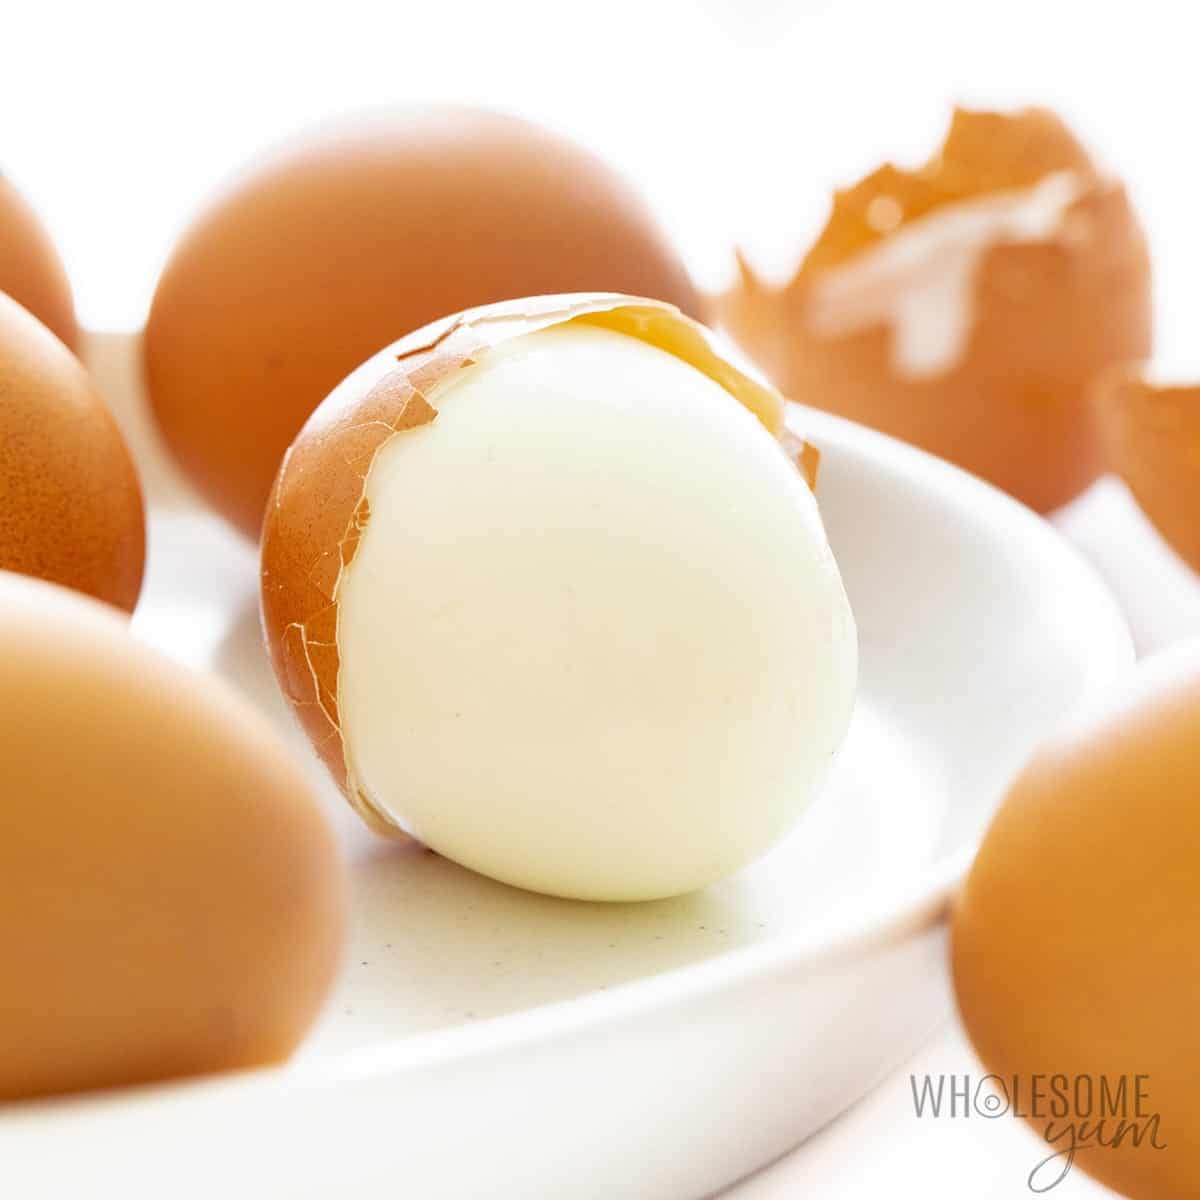 Easy peel hard boiled eggs with shell partially removed.